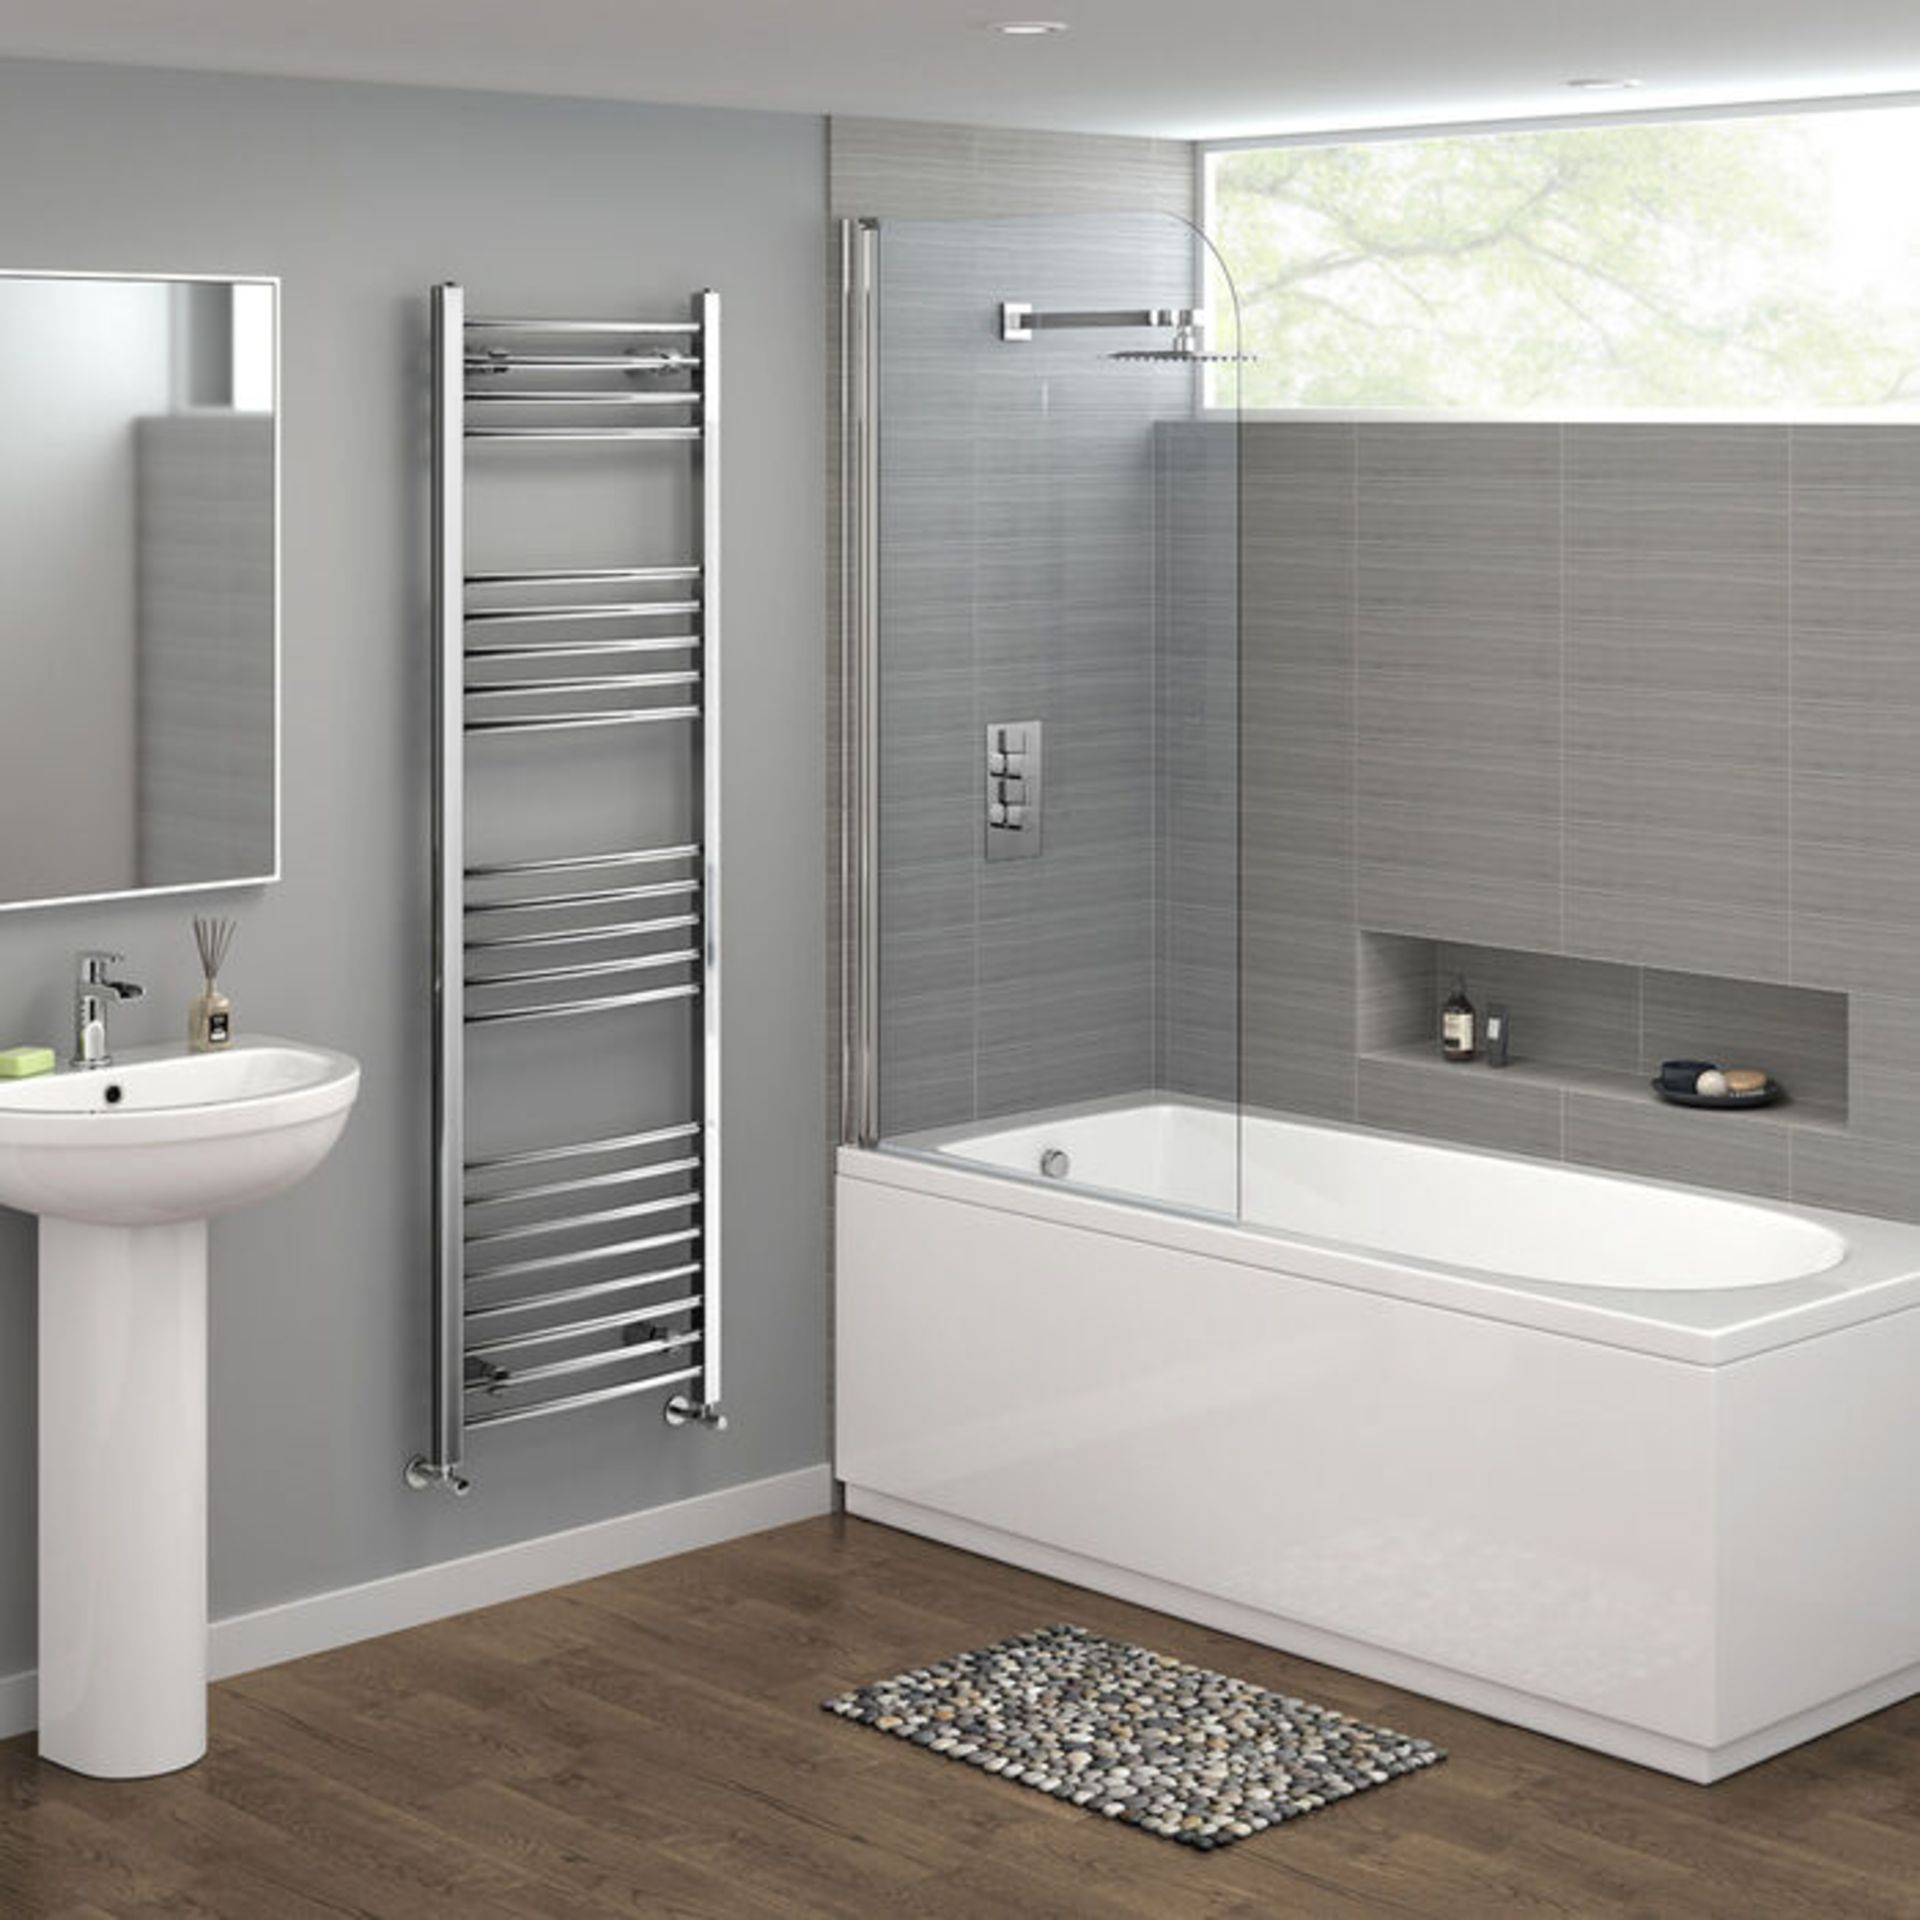 (AA50) 1600x600mm - 20mm Tubes - Chrome Curved Rail Ladder Towel Radiator. RRP £316.99. Our ... - Image 2 of 2